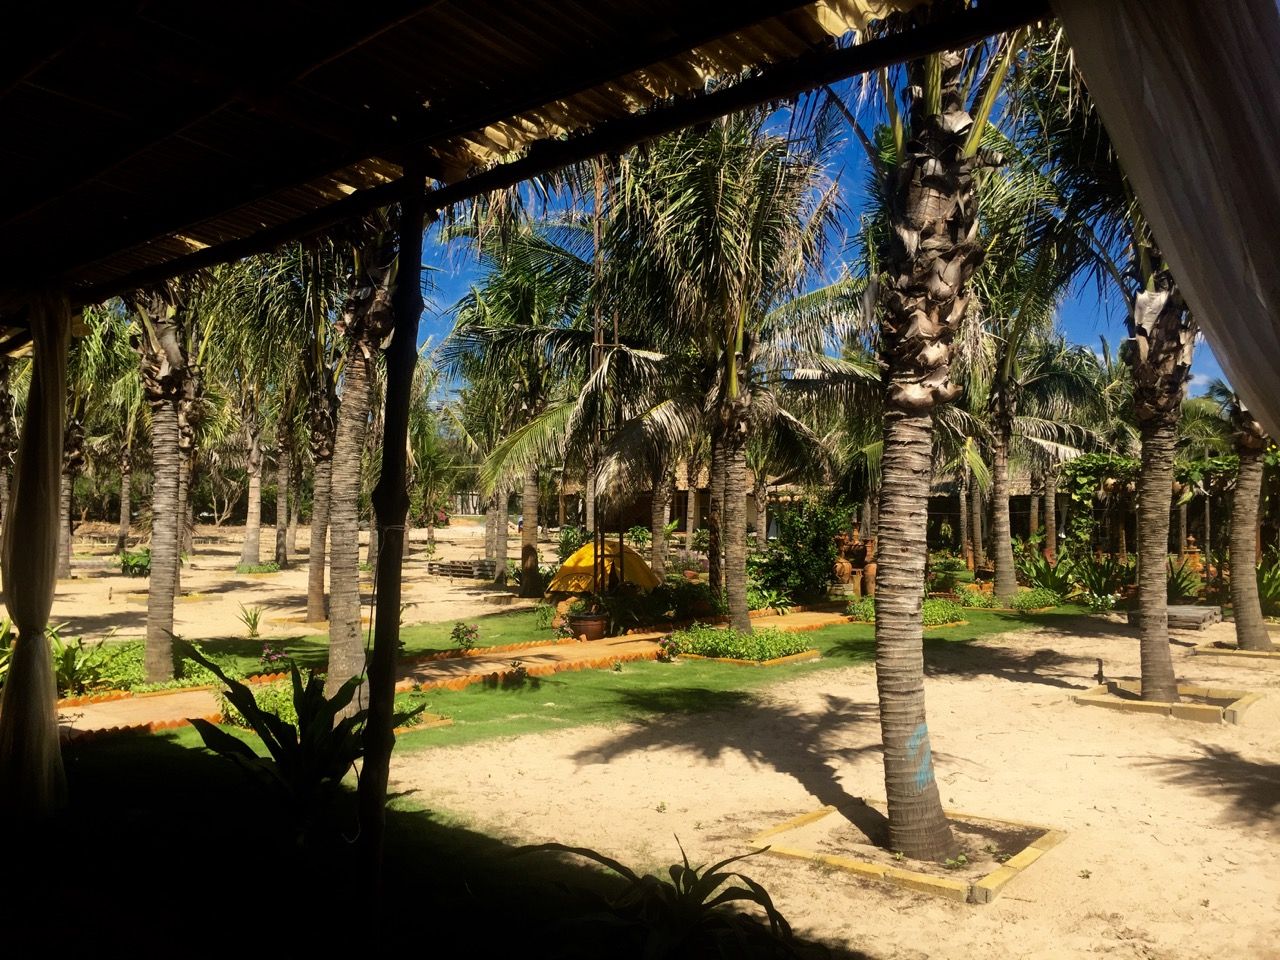 A maintained campground with palm trees and pathways.